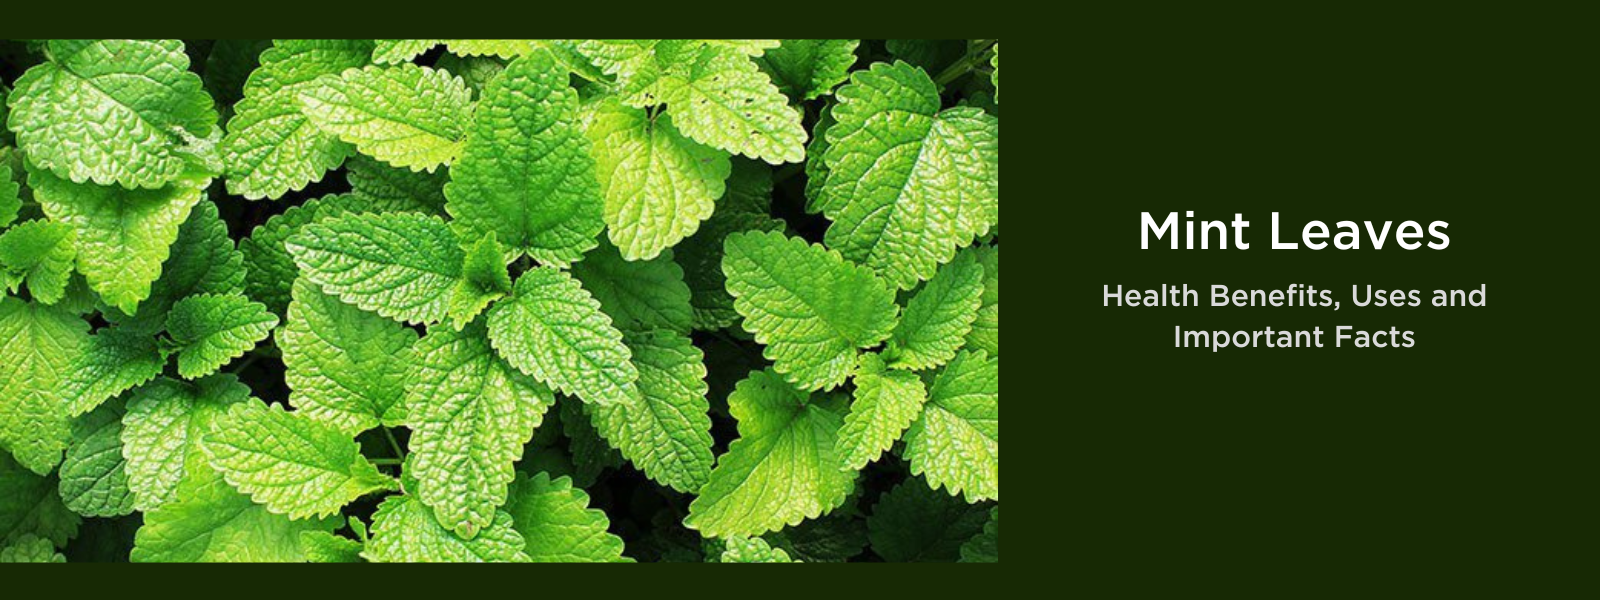 Mint leaves - Health Benefits, Uses and Important Facts - PotsandPans India